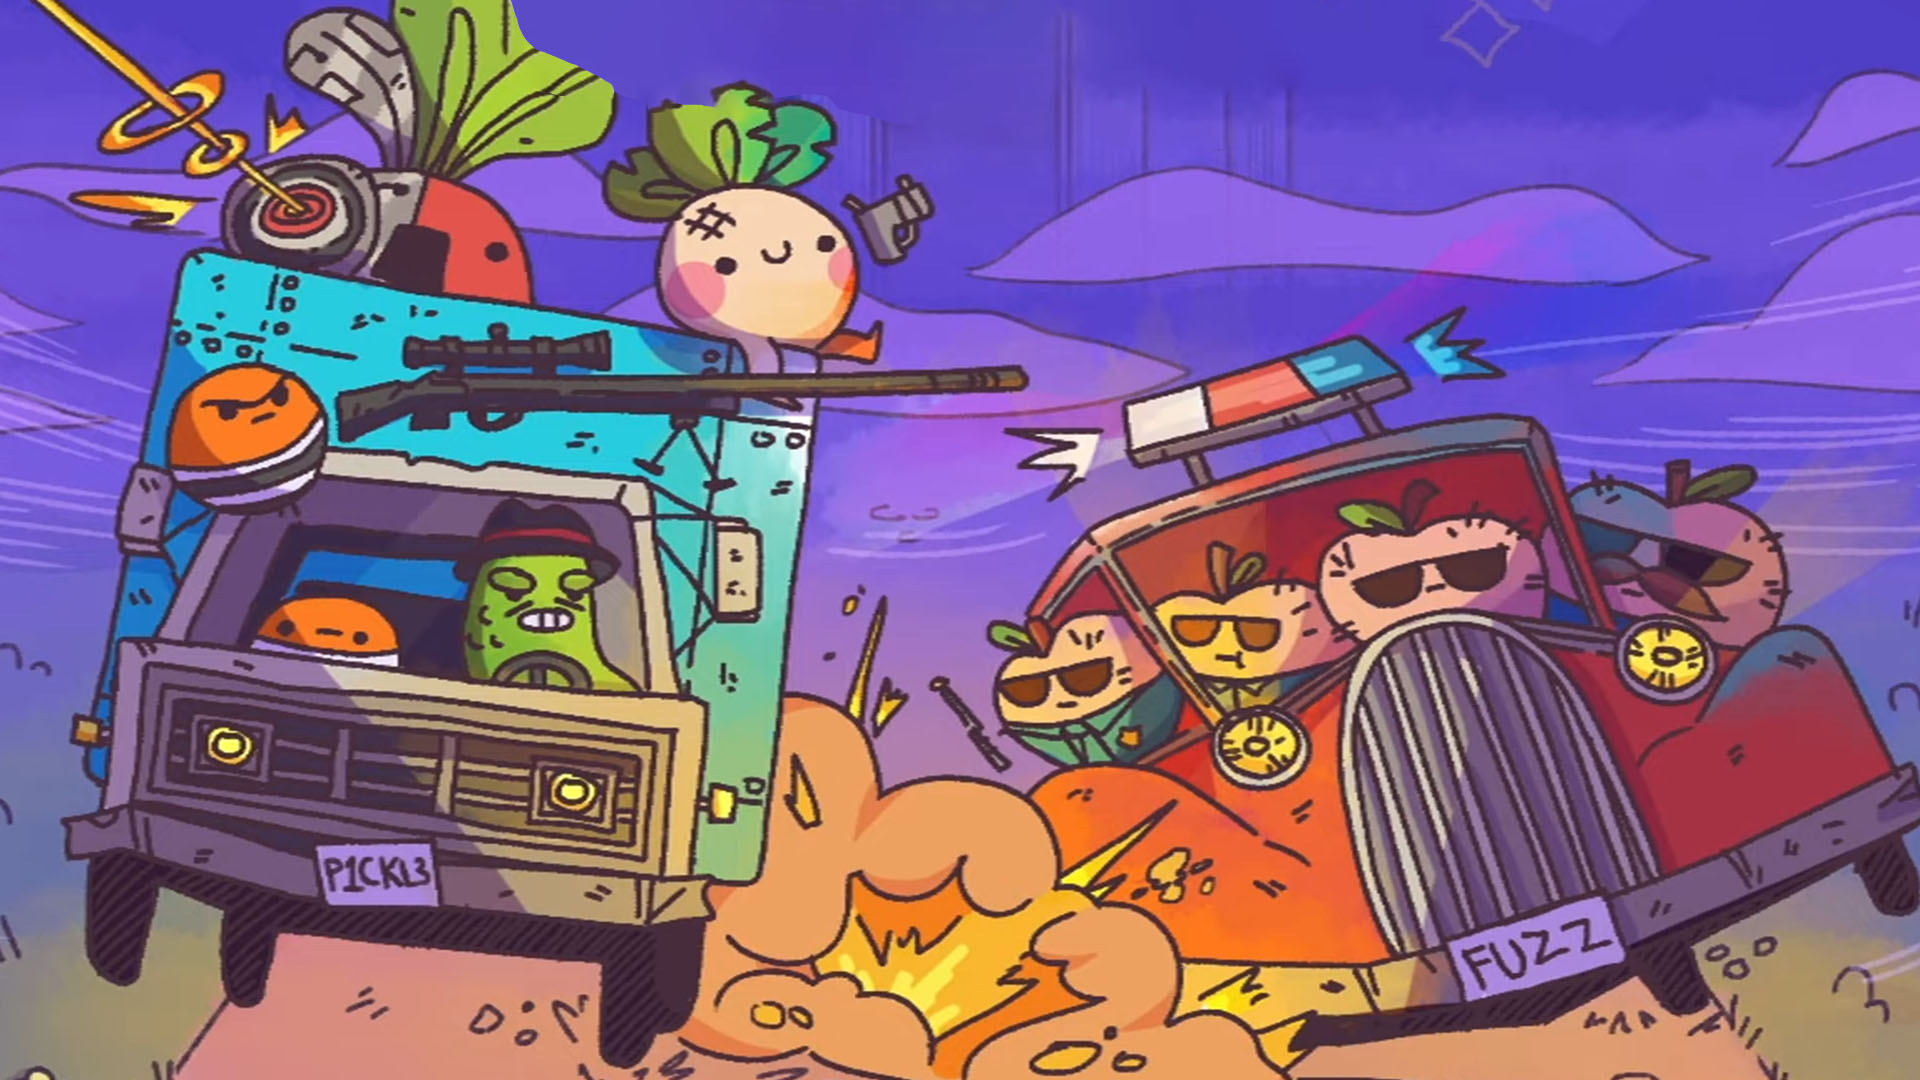 Turnip Boy Robs a Bank release date estimate, gameplay, and news